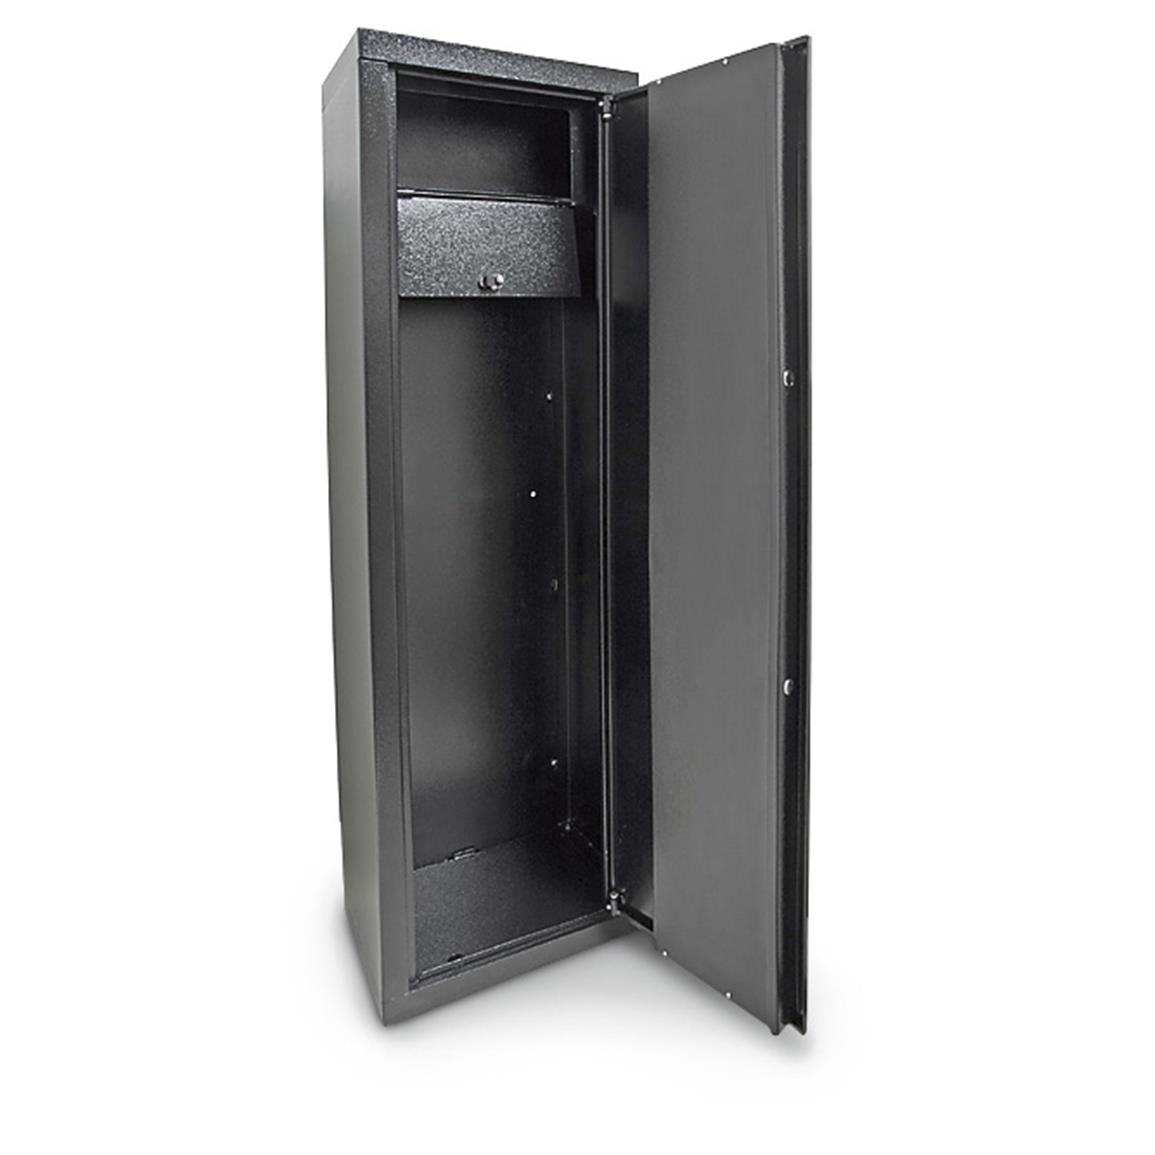 First Watch 8 Gun Rta Security Cabinet With Electronic Locking